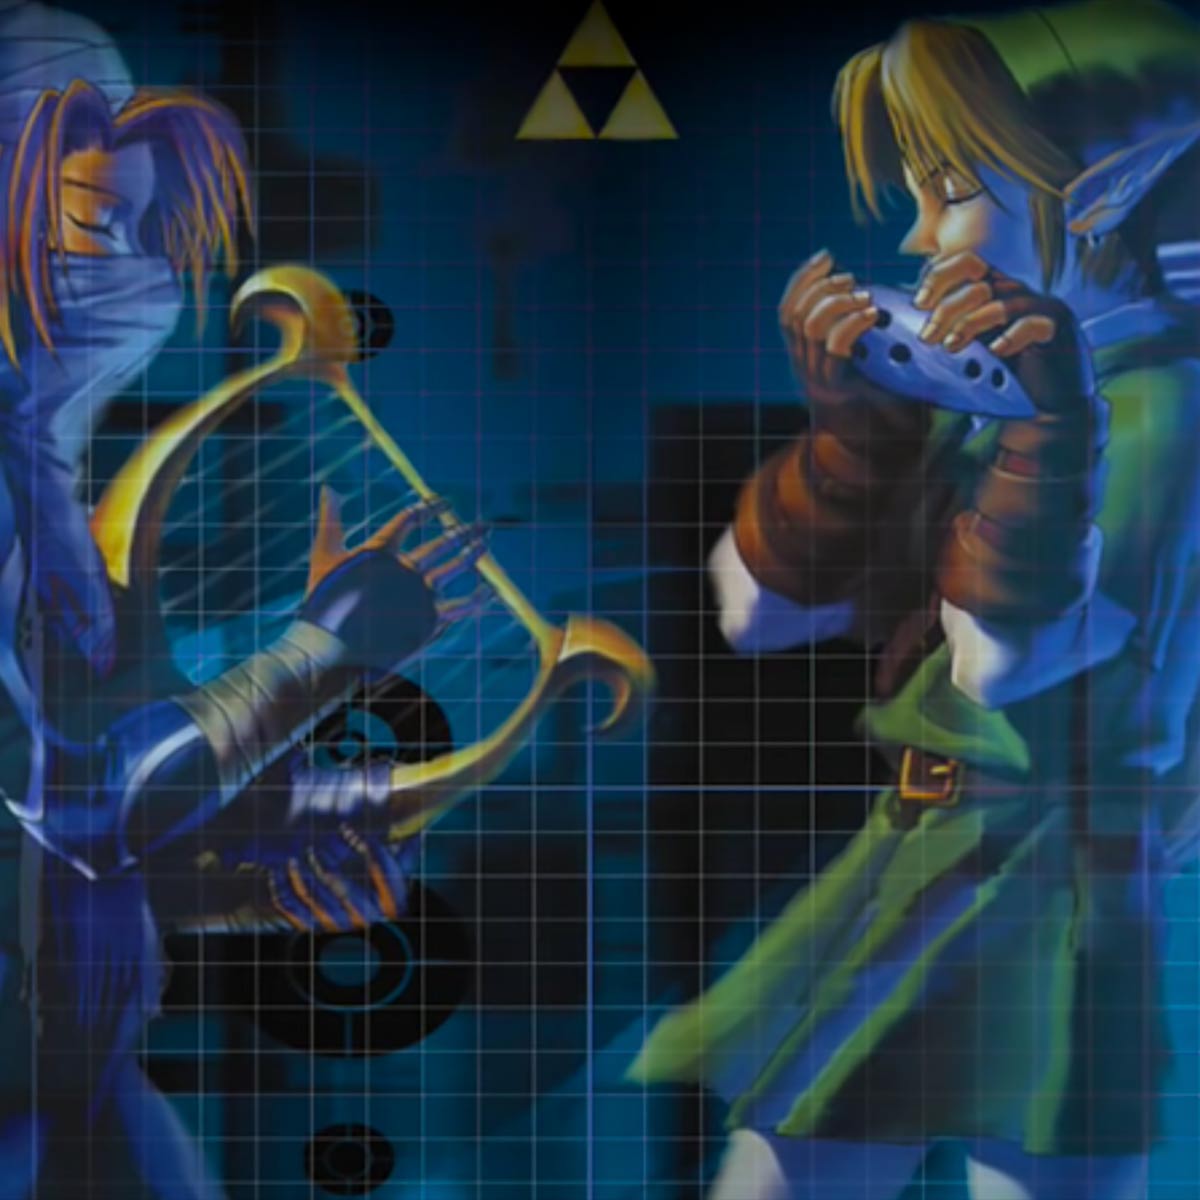 Game Music Themes - Song of Storms from The Legend of Zelda